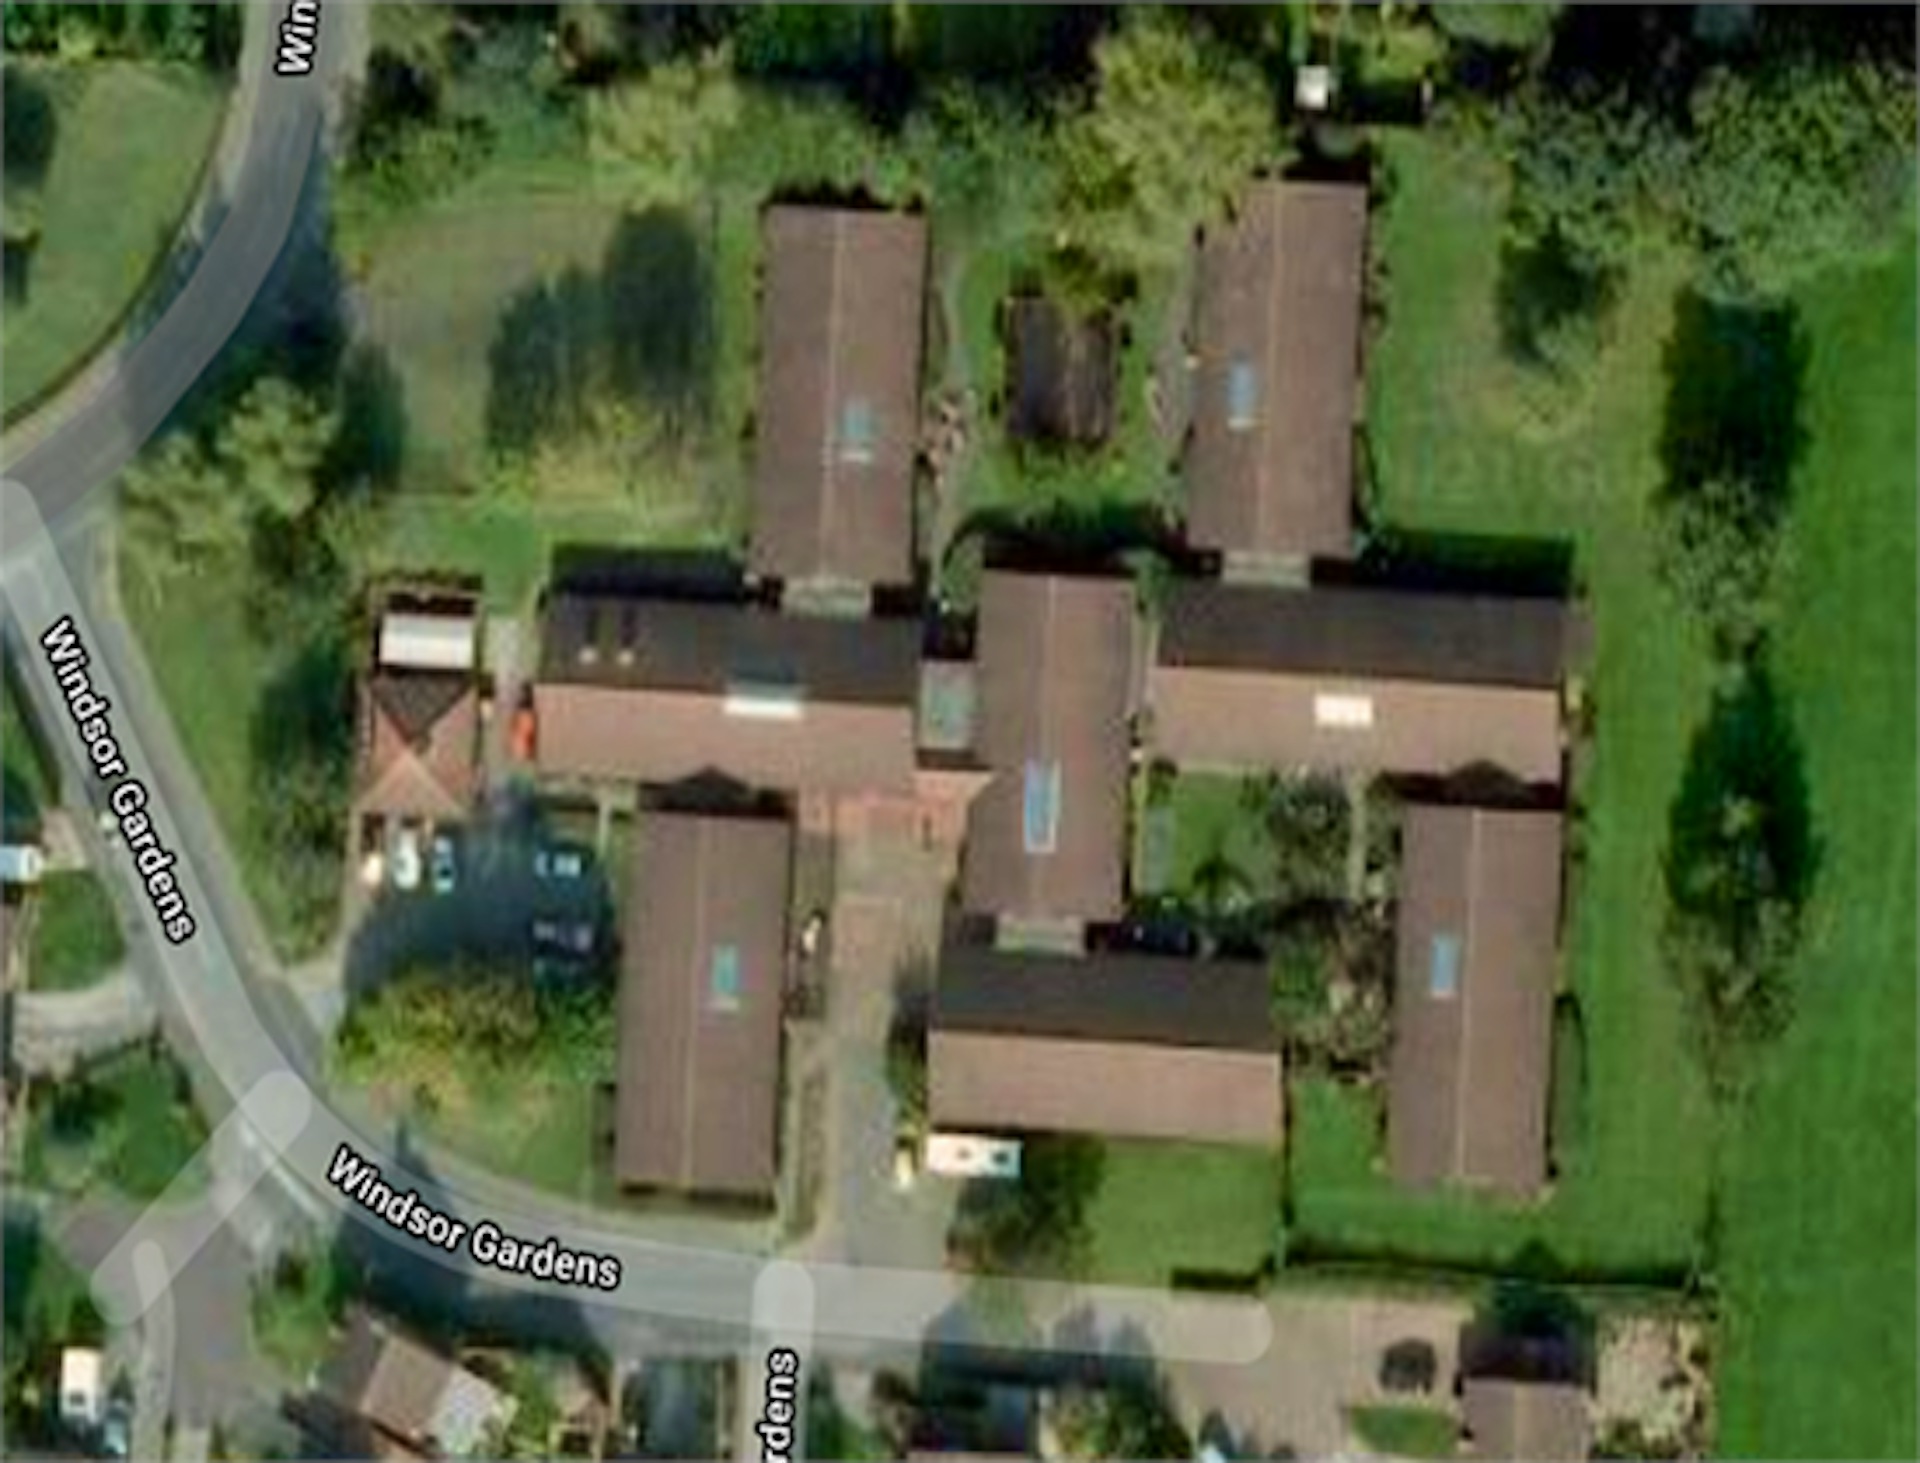 James Hince court aerial view gallery